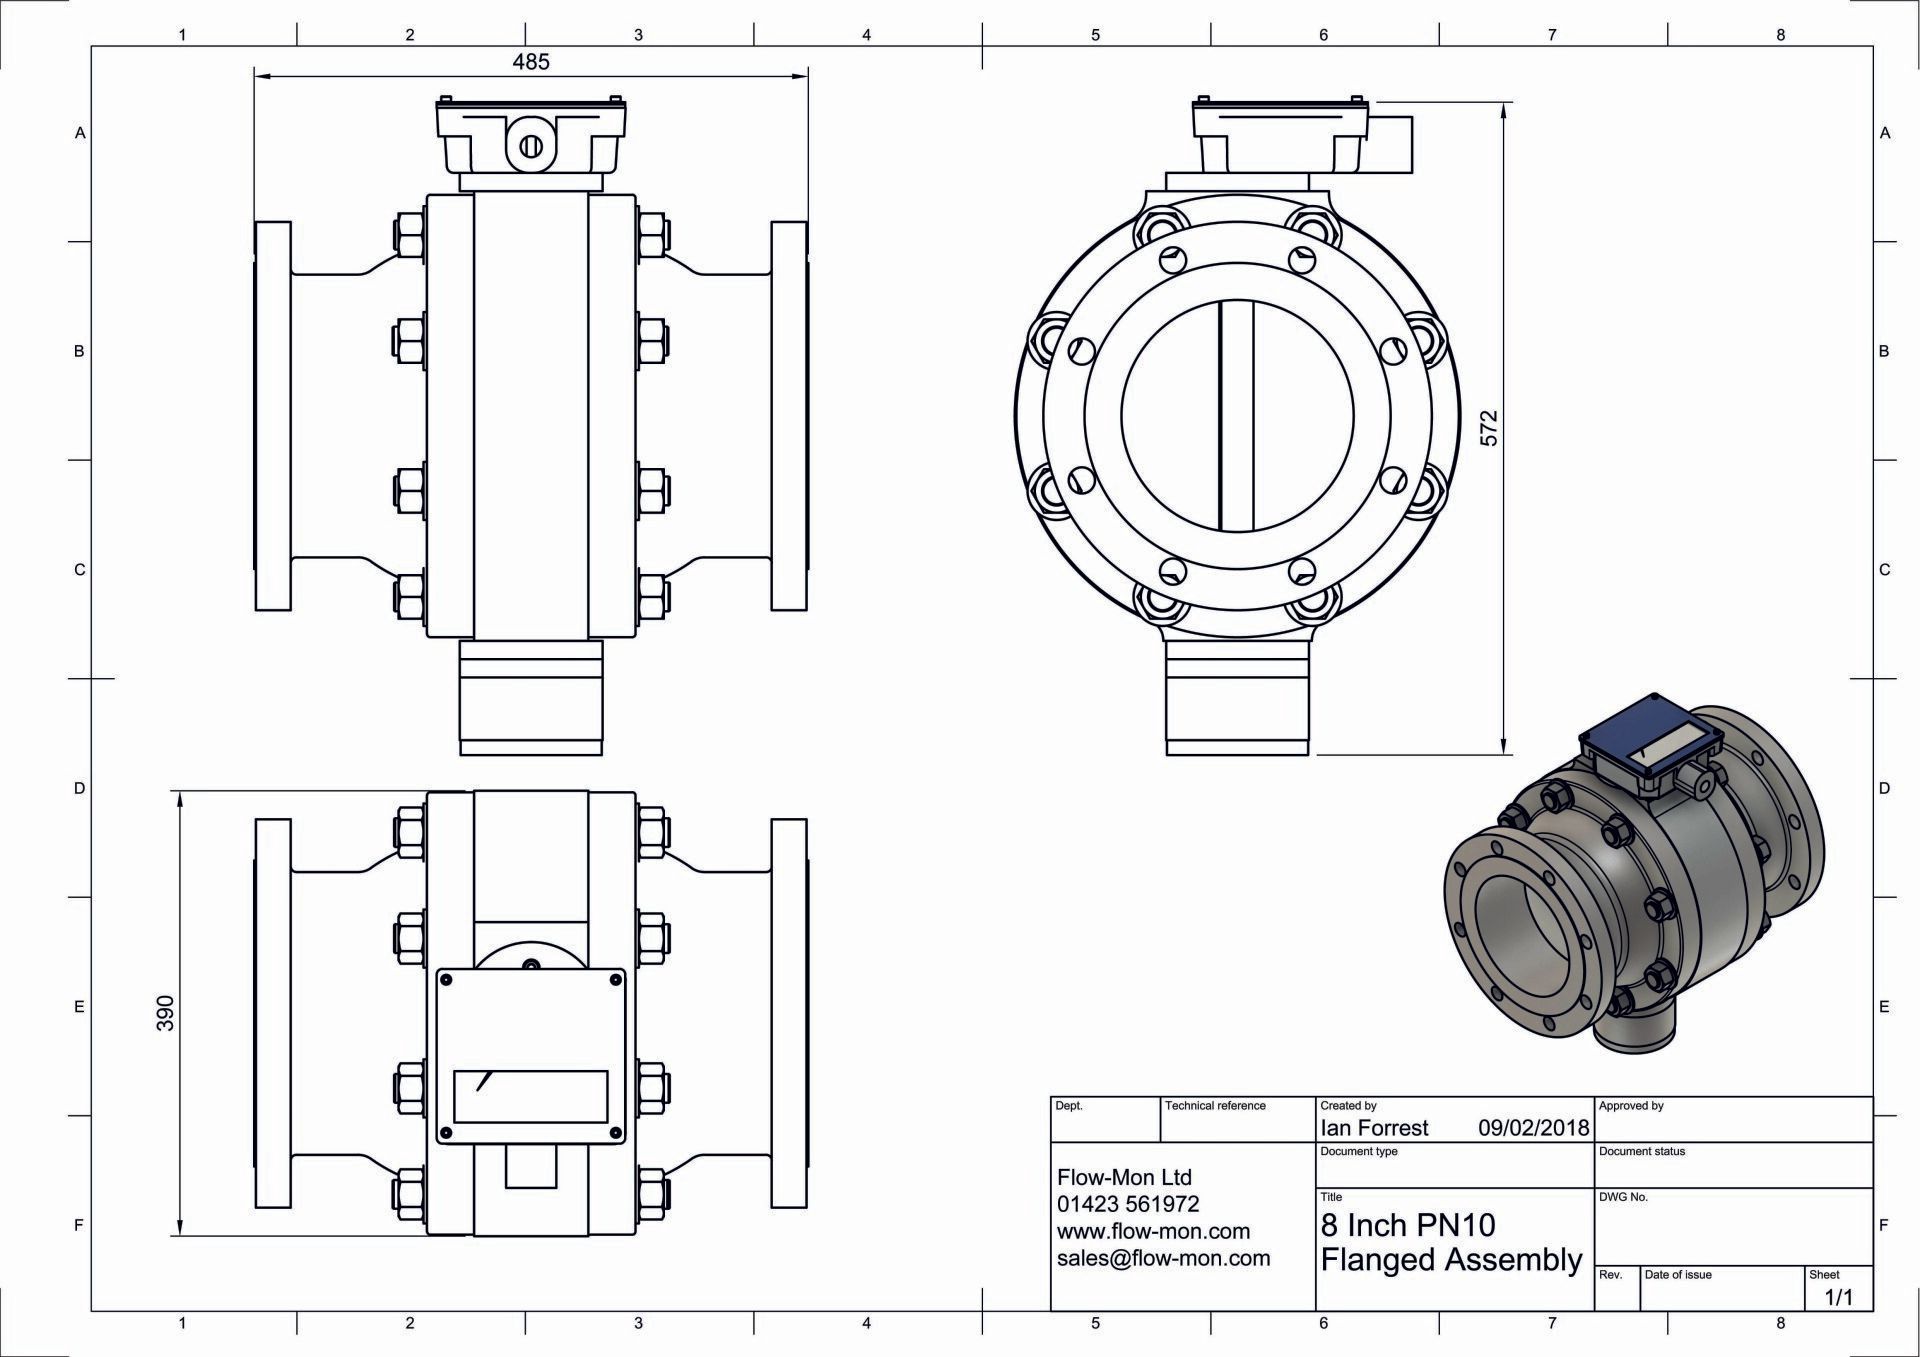 8 inch PN10 Flanged assembly drawing